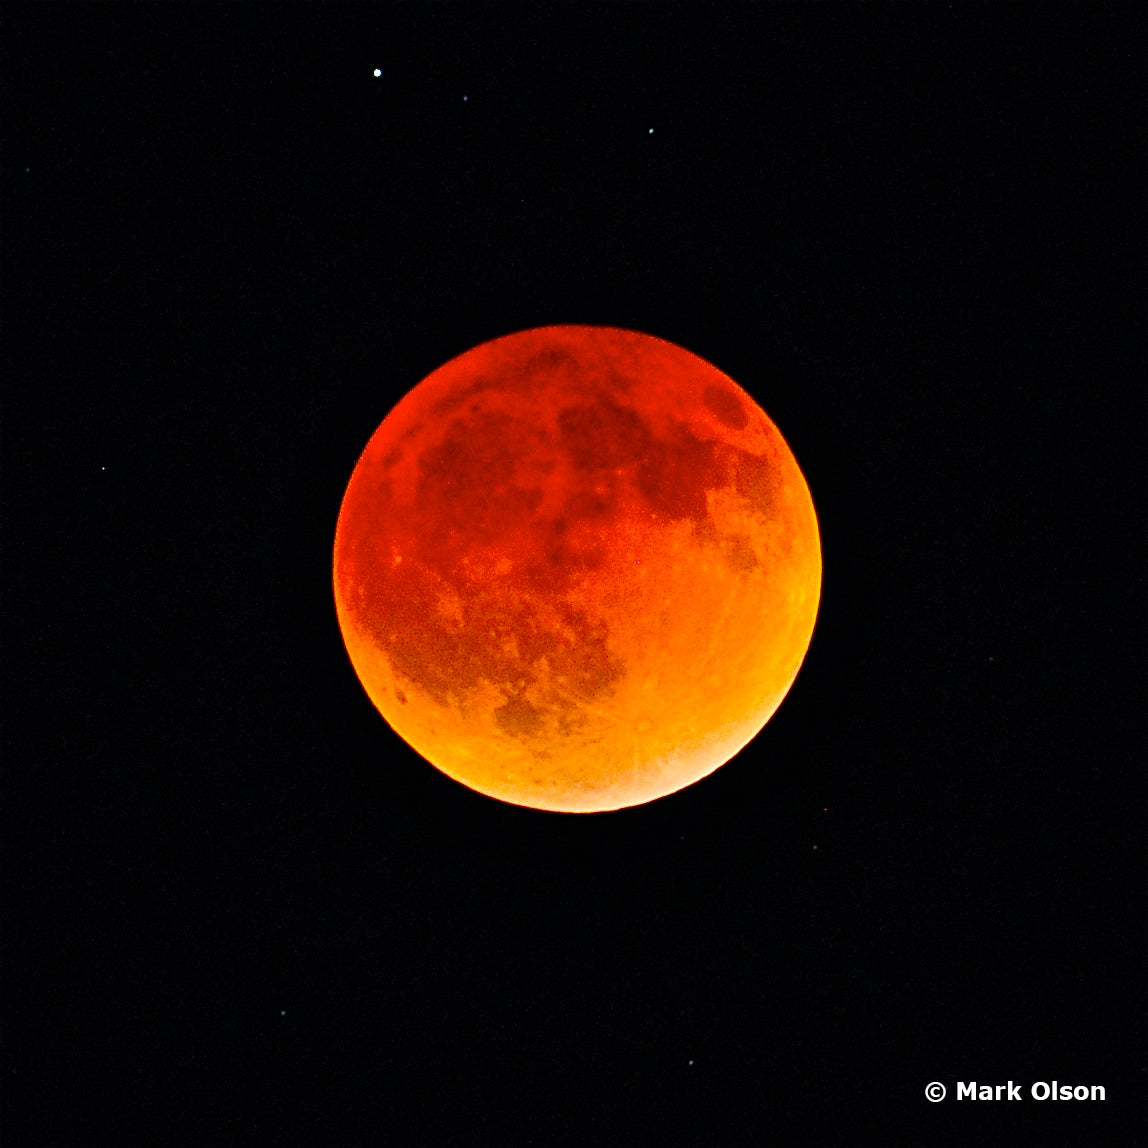 How I Got That Shot: Photographing the "Blood Moon" Lunar Eclipse